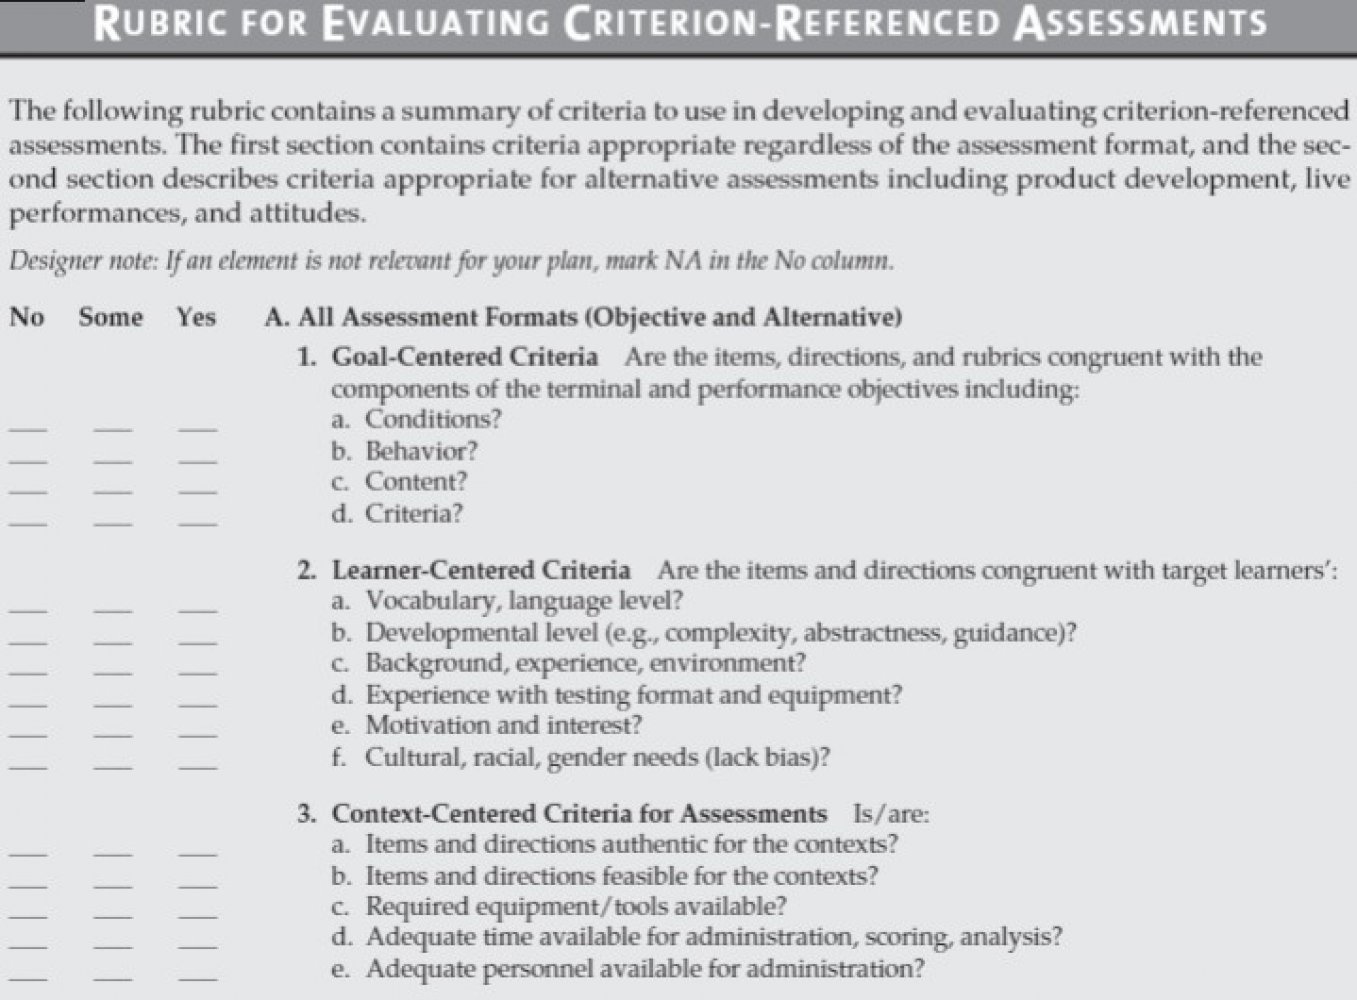 Rubric for evaluating criterion based assessments